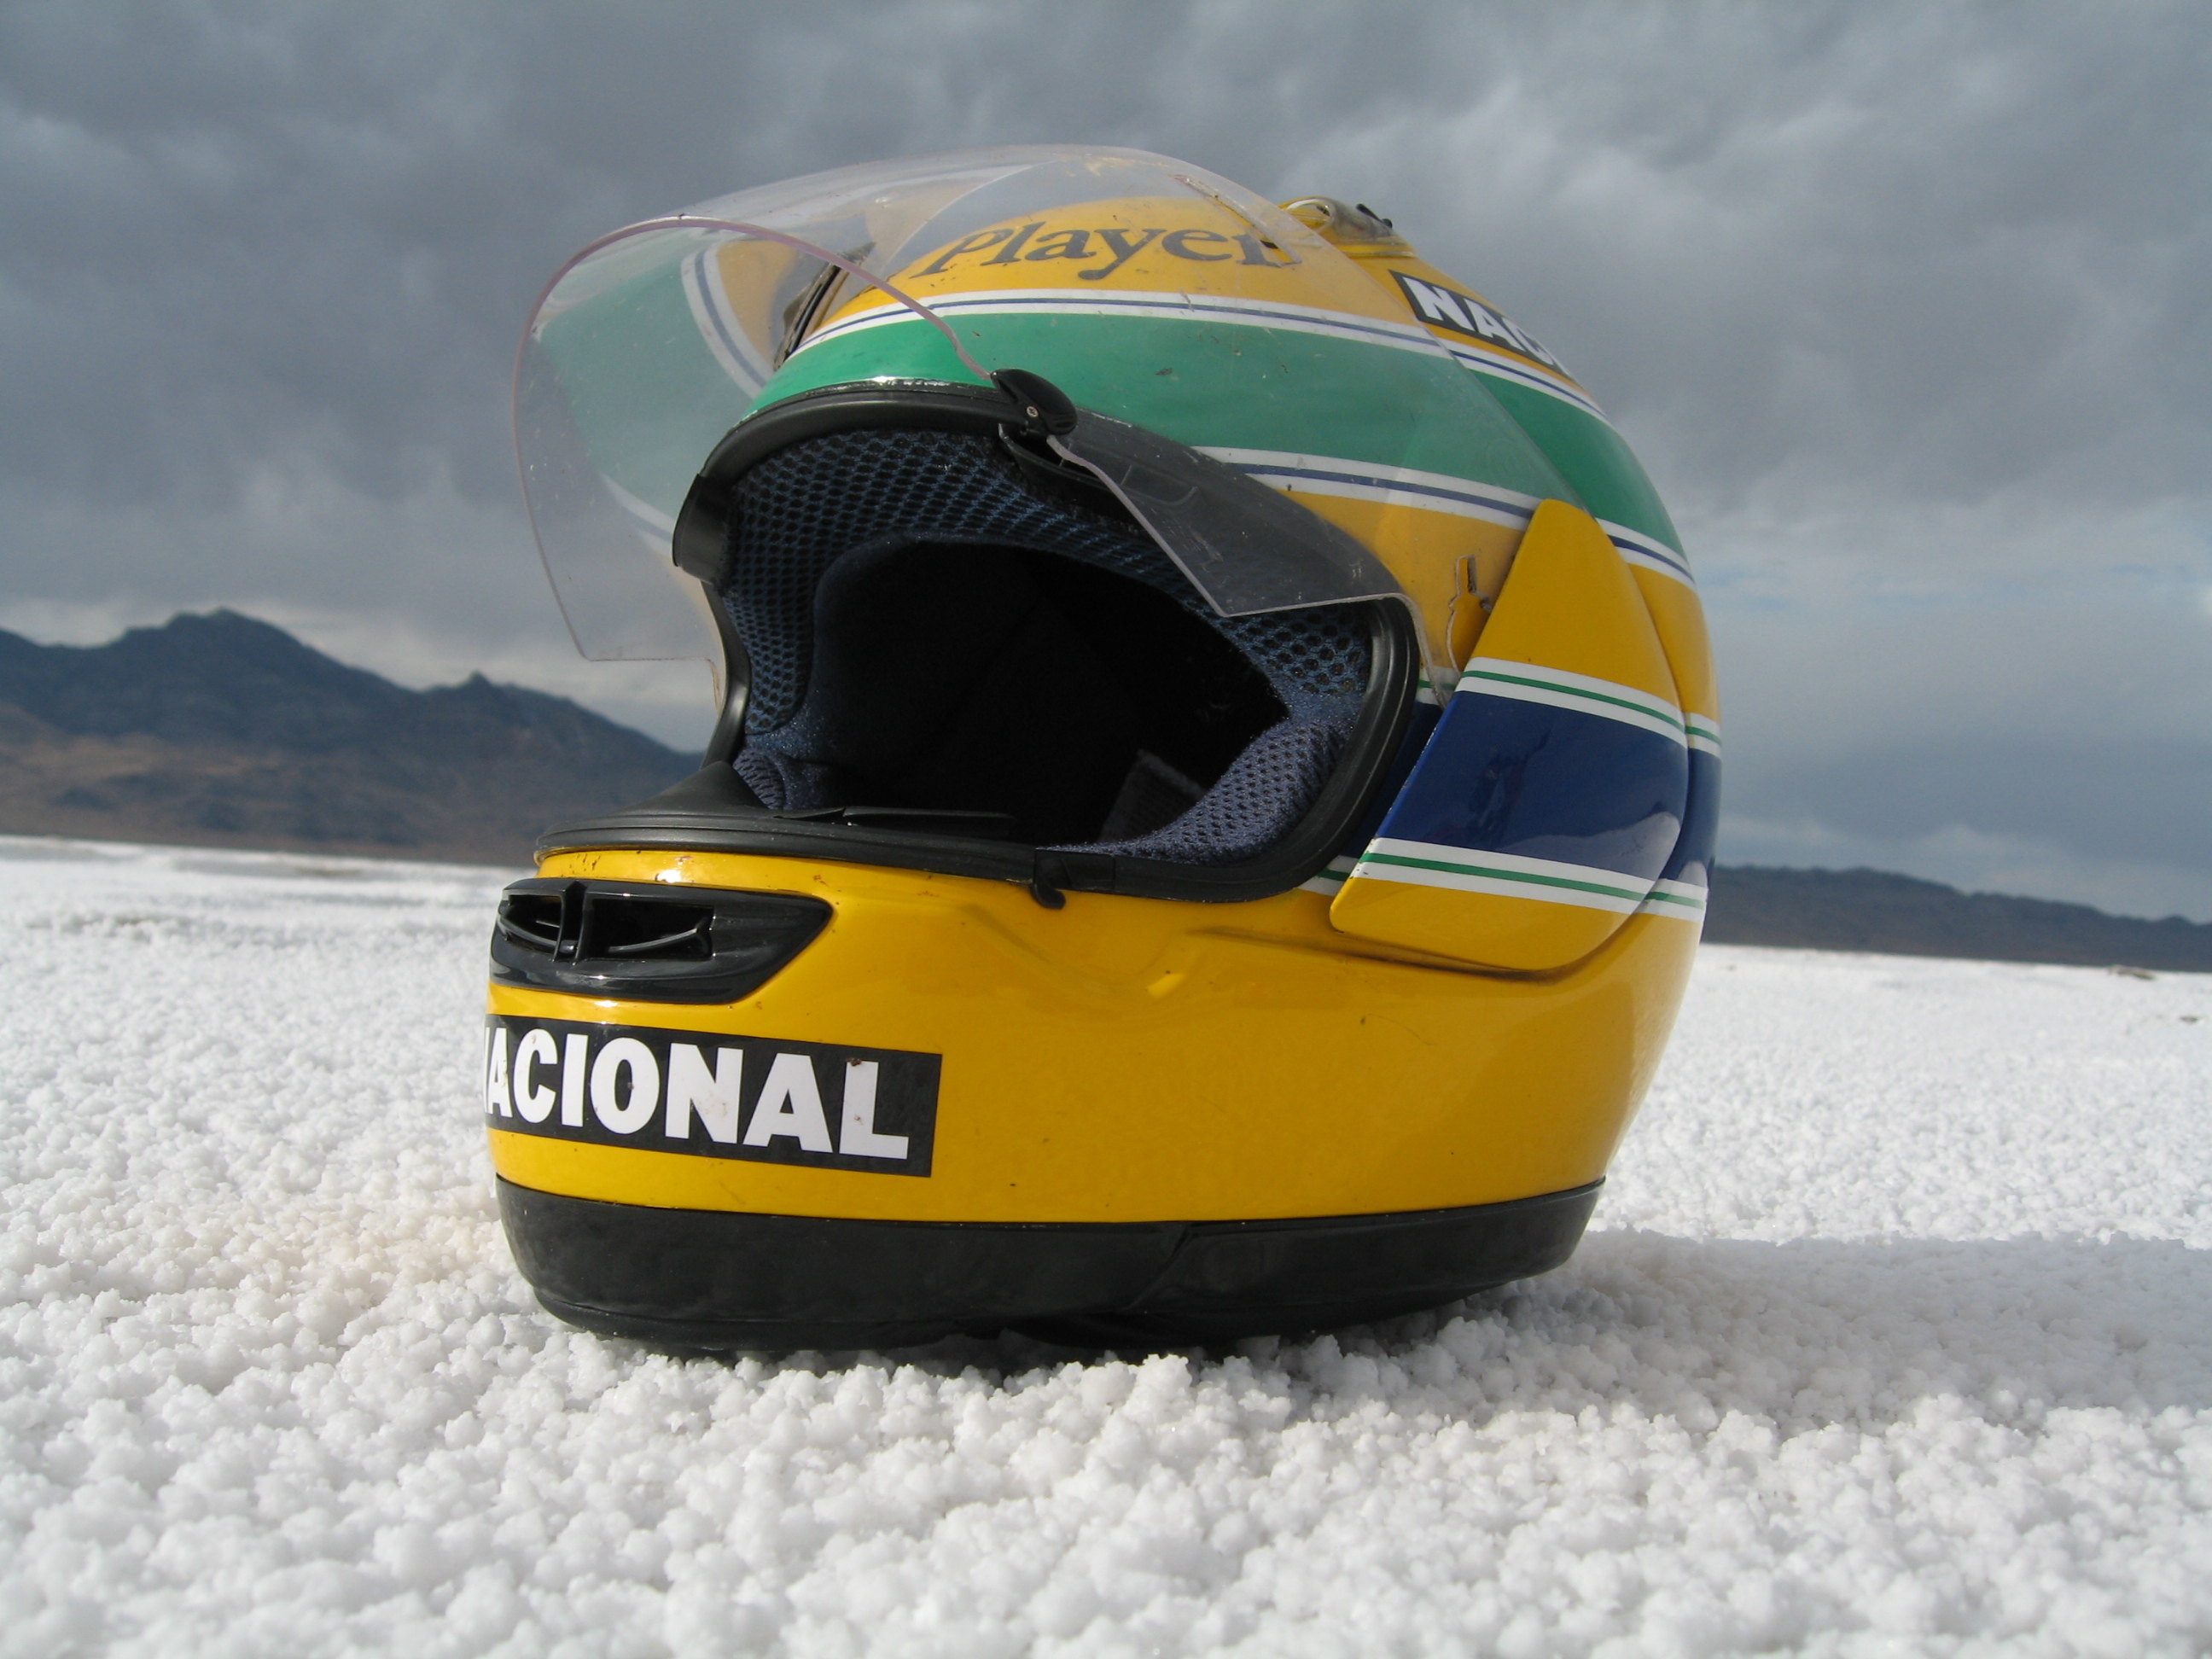 Senna – the Movie, and the Divine Right to Win